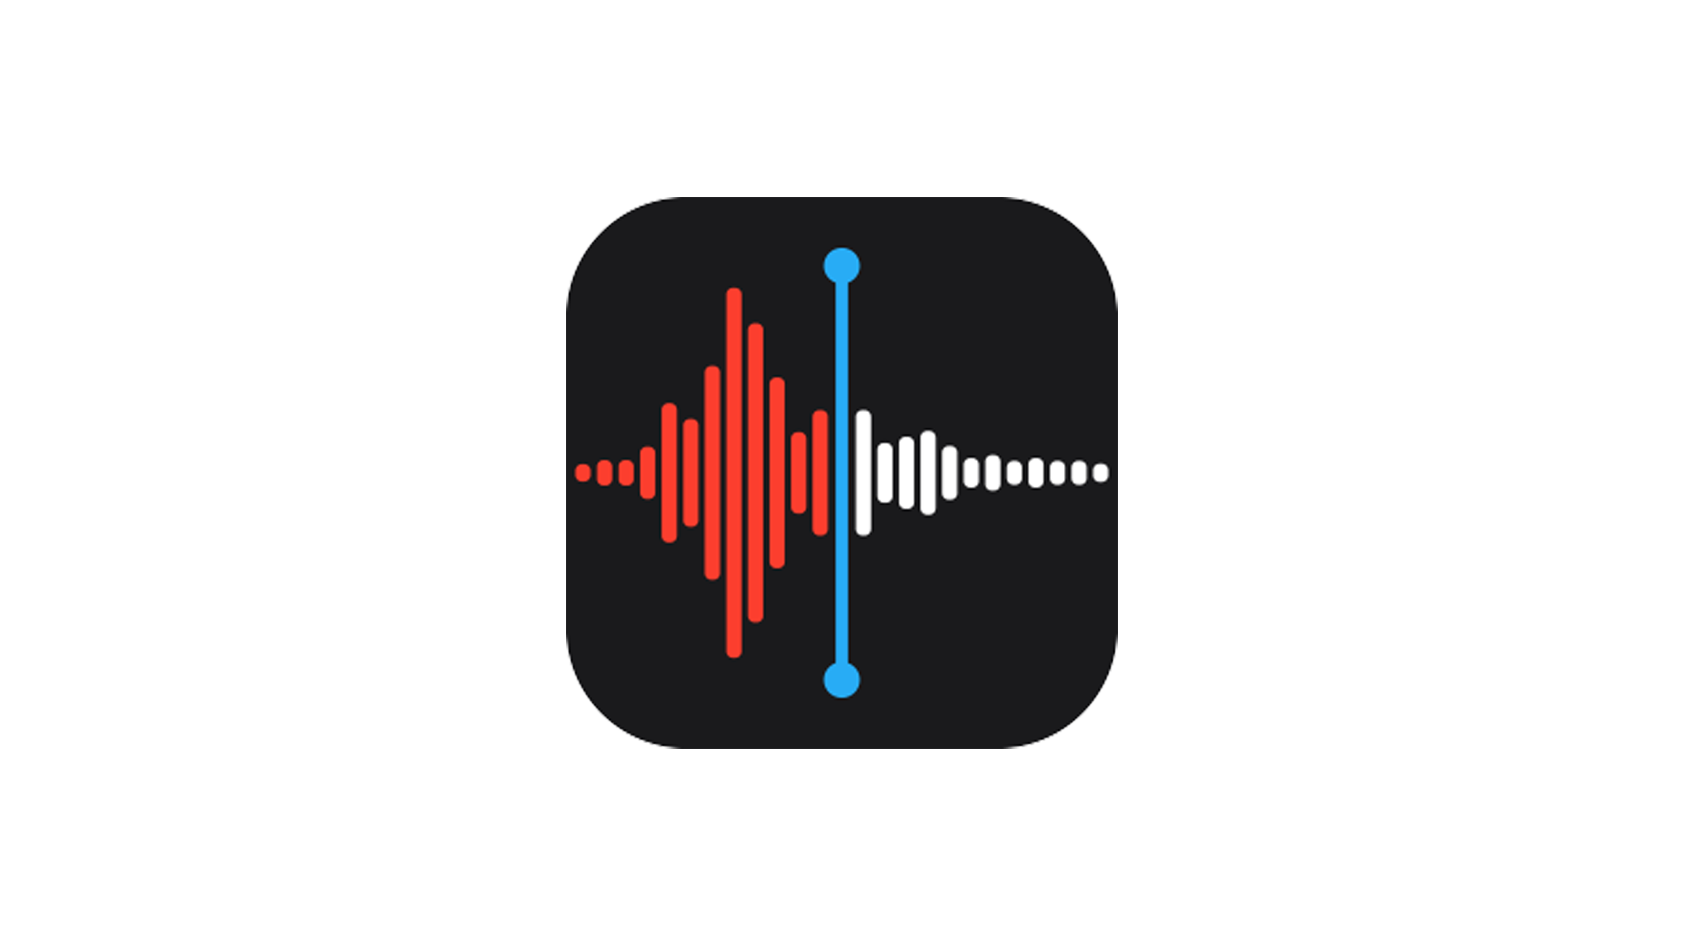 Dolby On: Record Audio Music APK para Android - Download